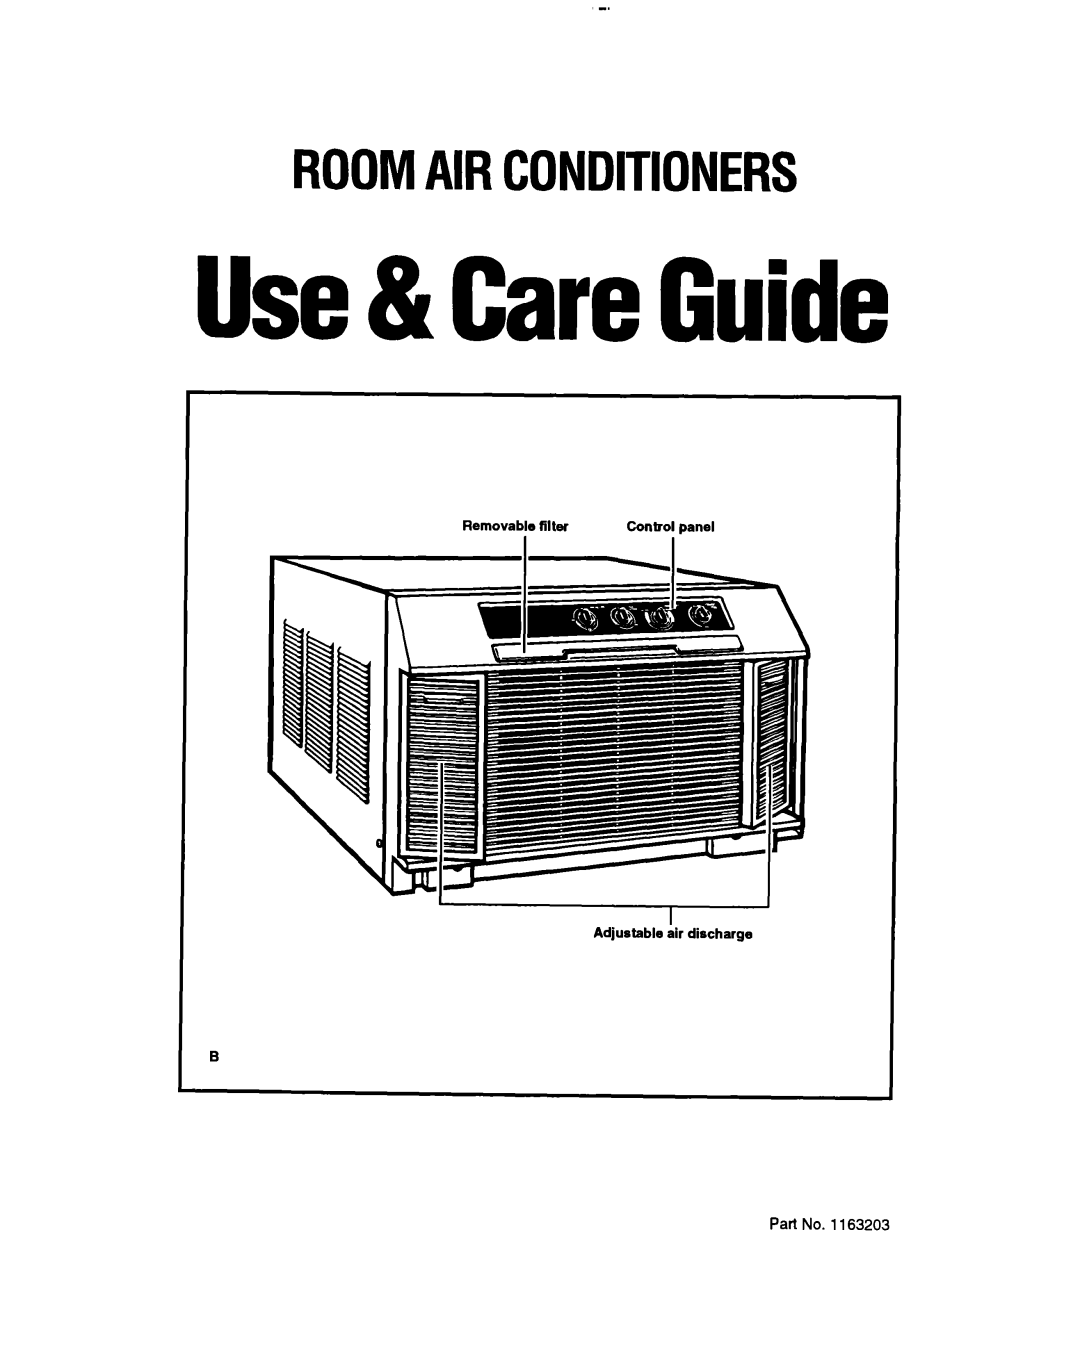 Whirlpool RH123A1 manual Roomairconditioners, Use& CareGuide 